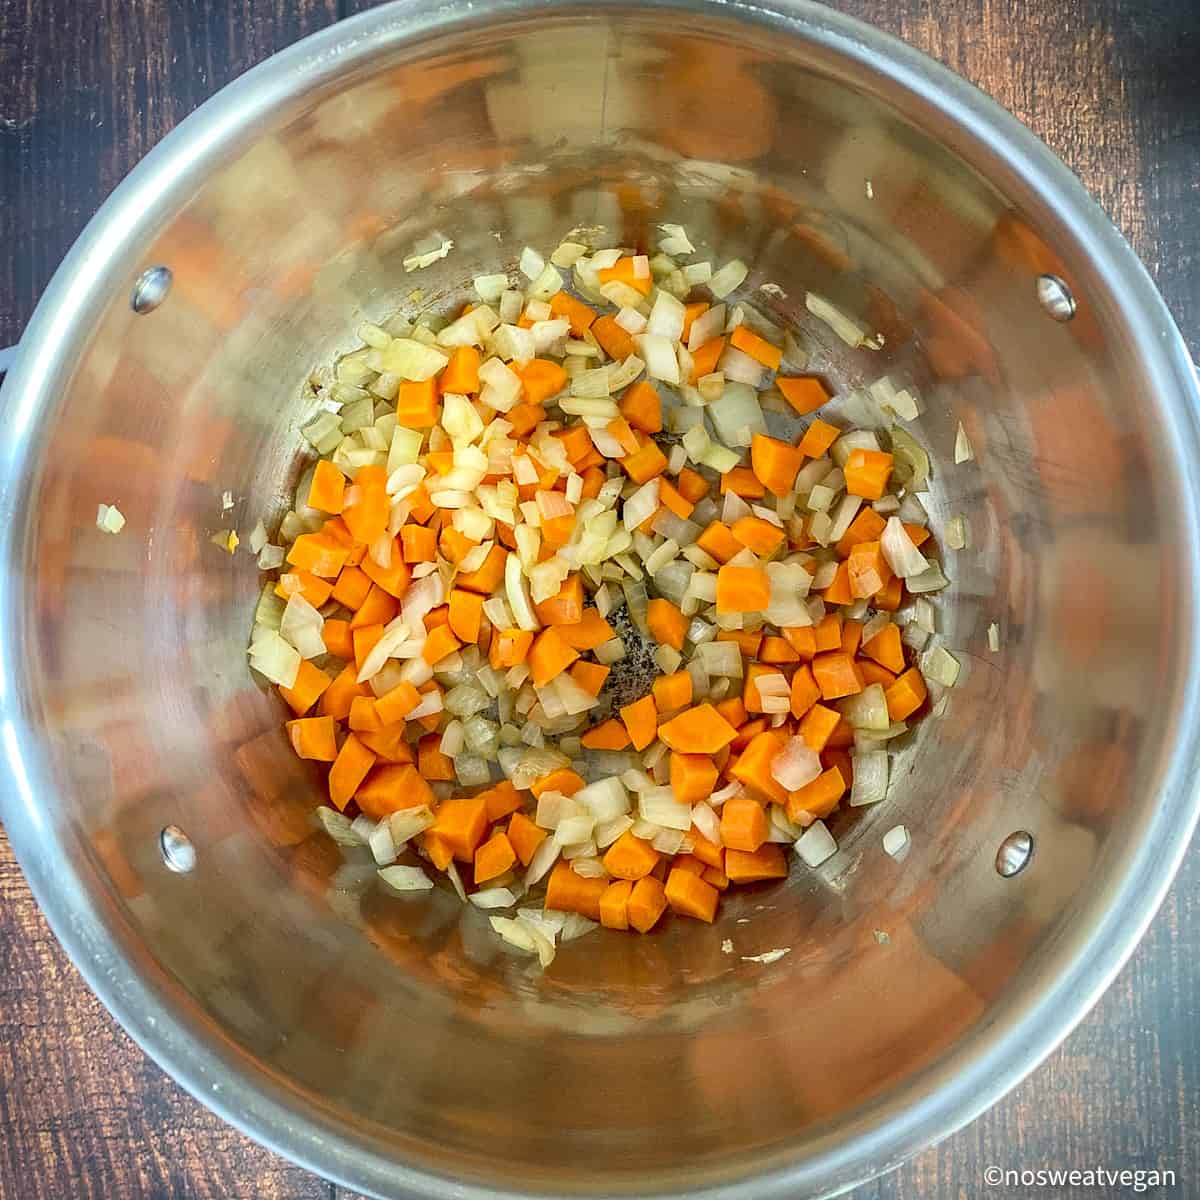 Diced carrots and onions in a pot.